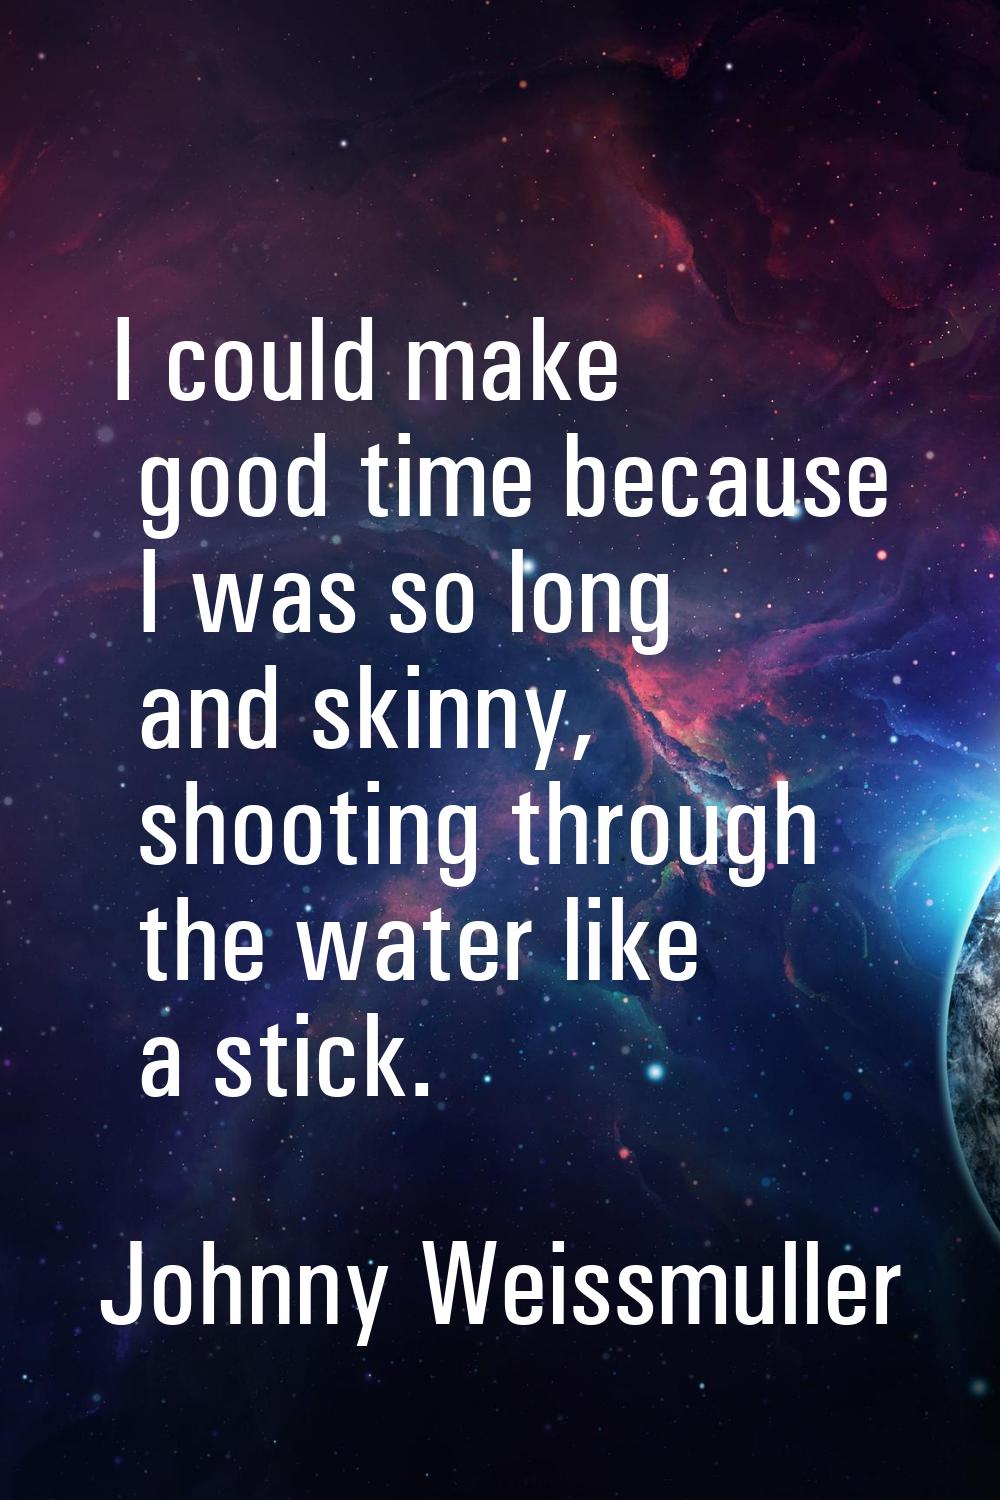 I could make good time because I was so long and skinny, shooting through the water like a stick.